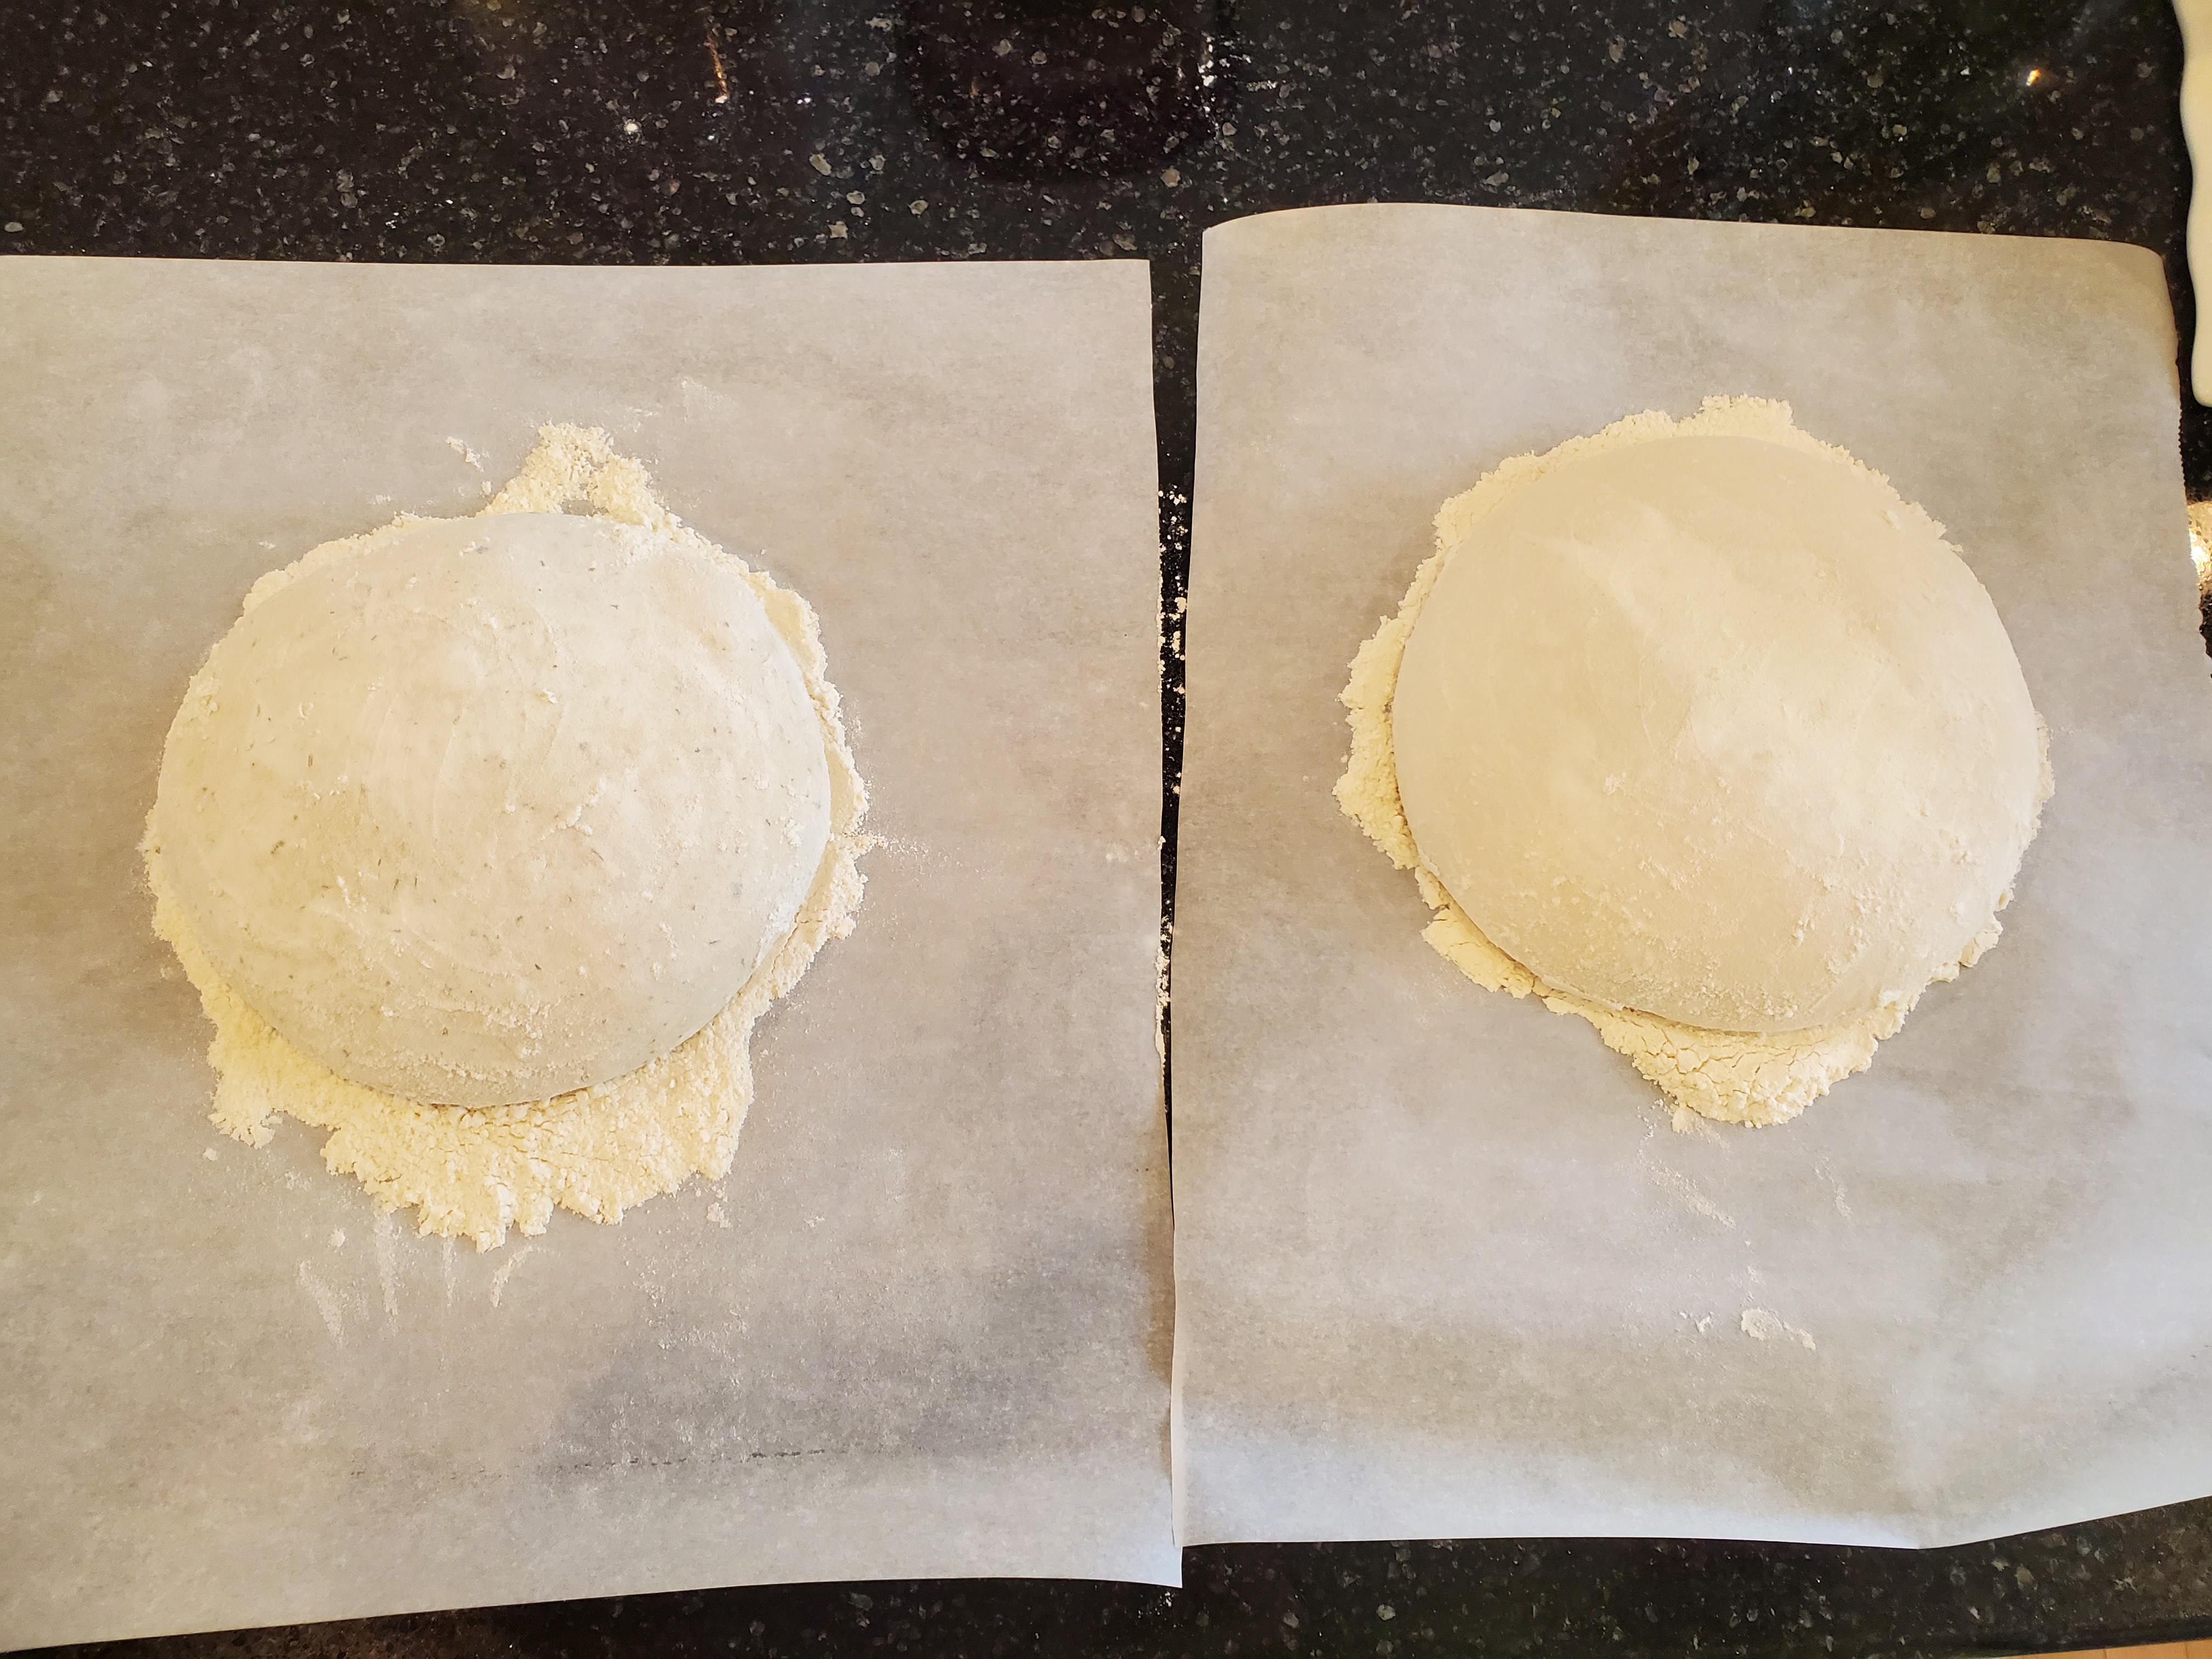 Two balls of sourdough rising on floured parchment paper on a black granite coutertop.